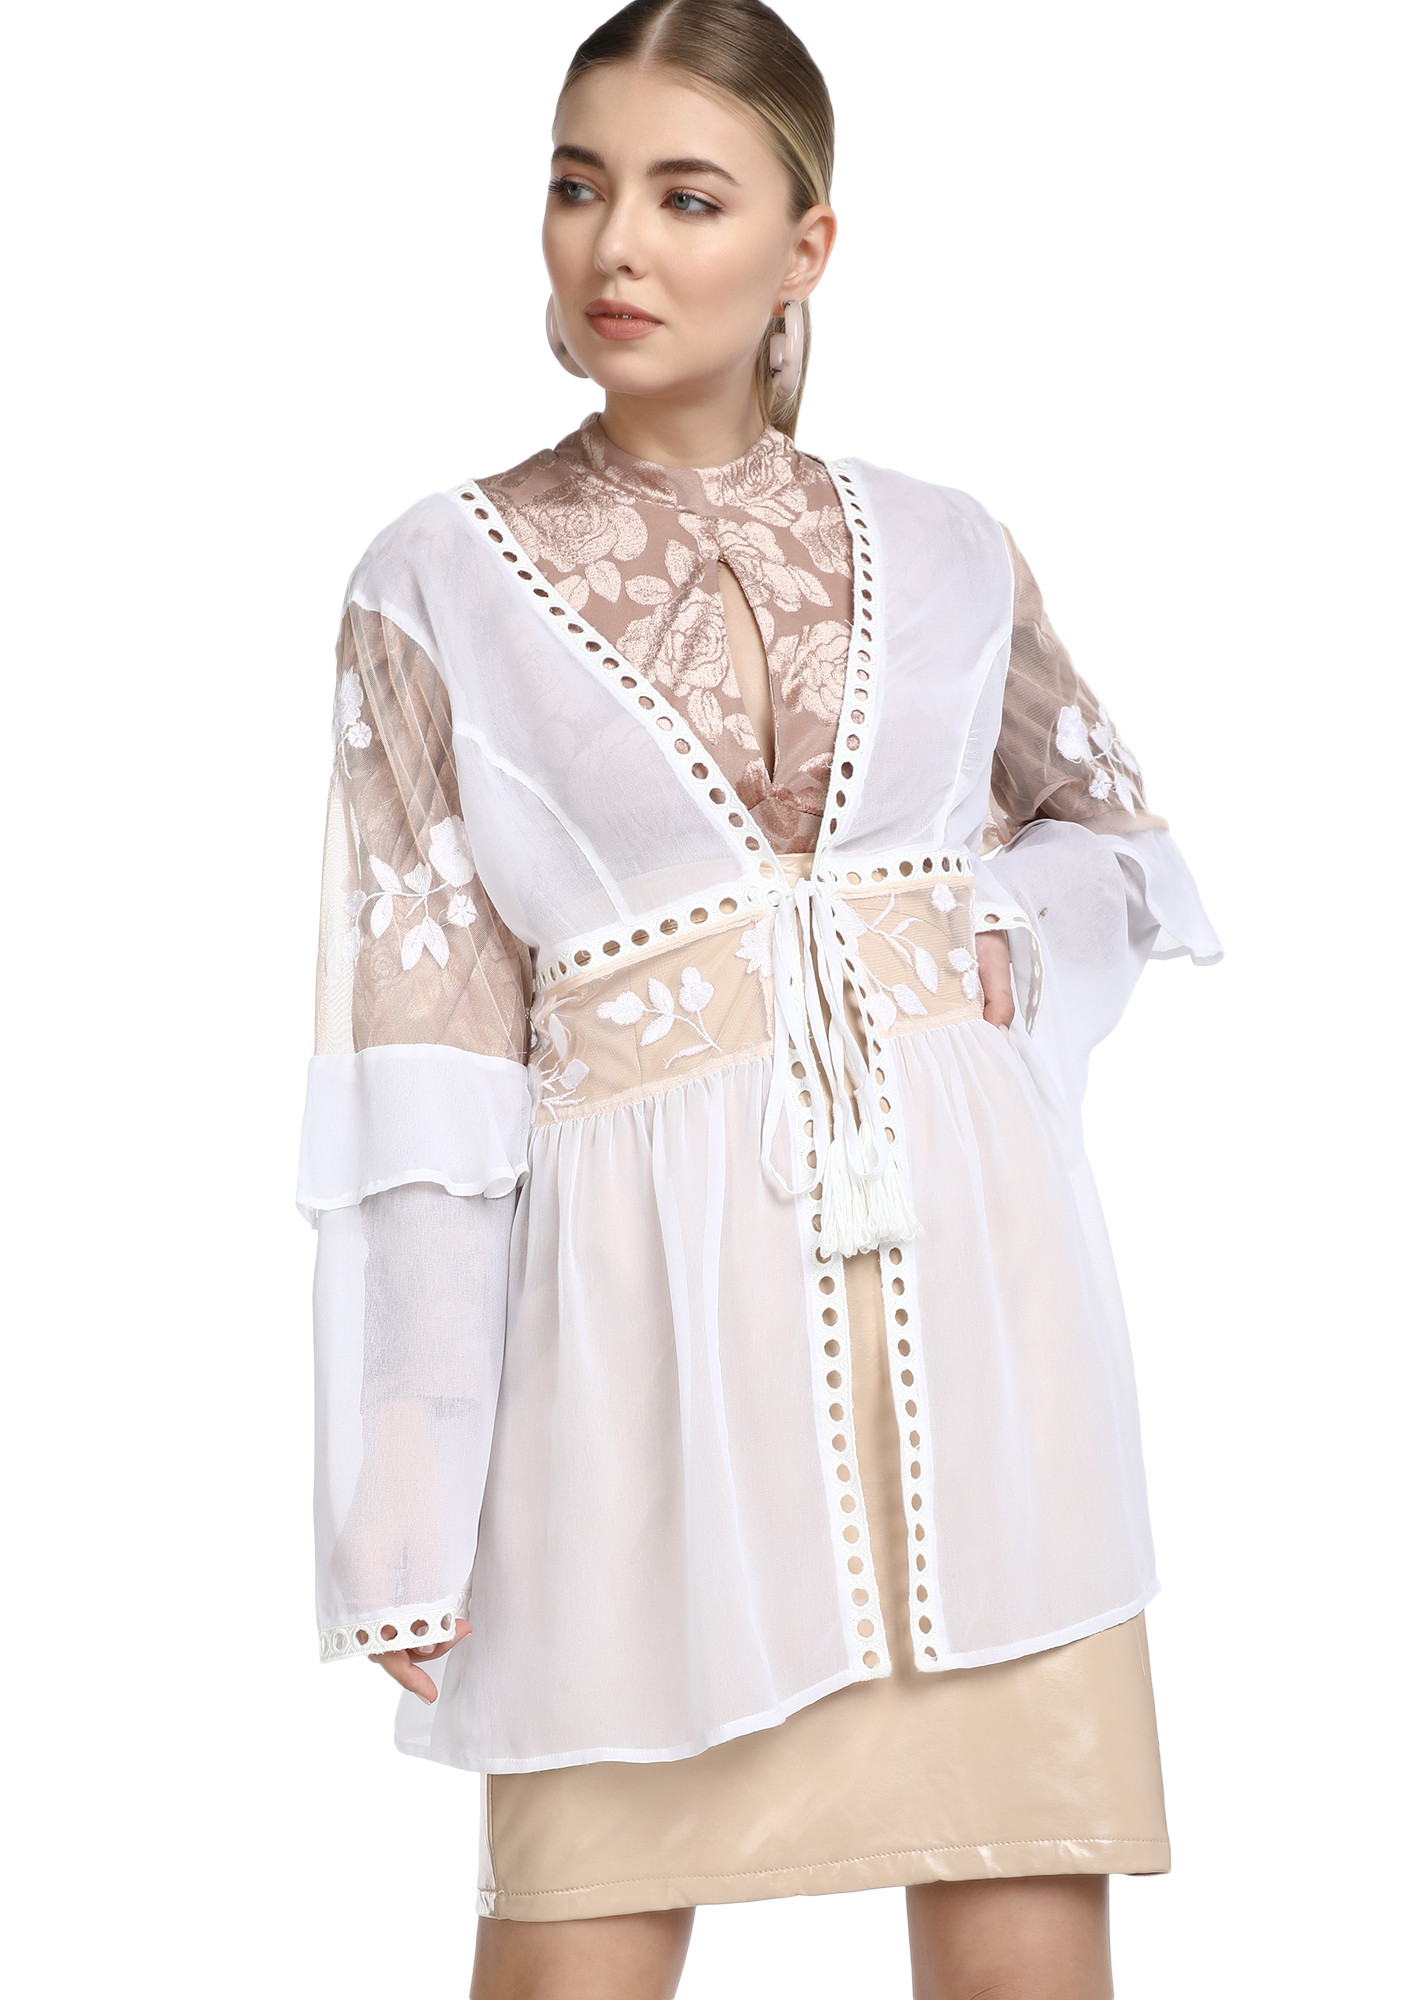 PERFECT WEEKEND VIBE WHITE COVER UP